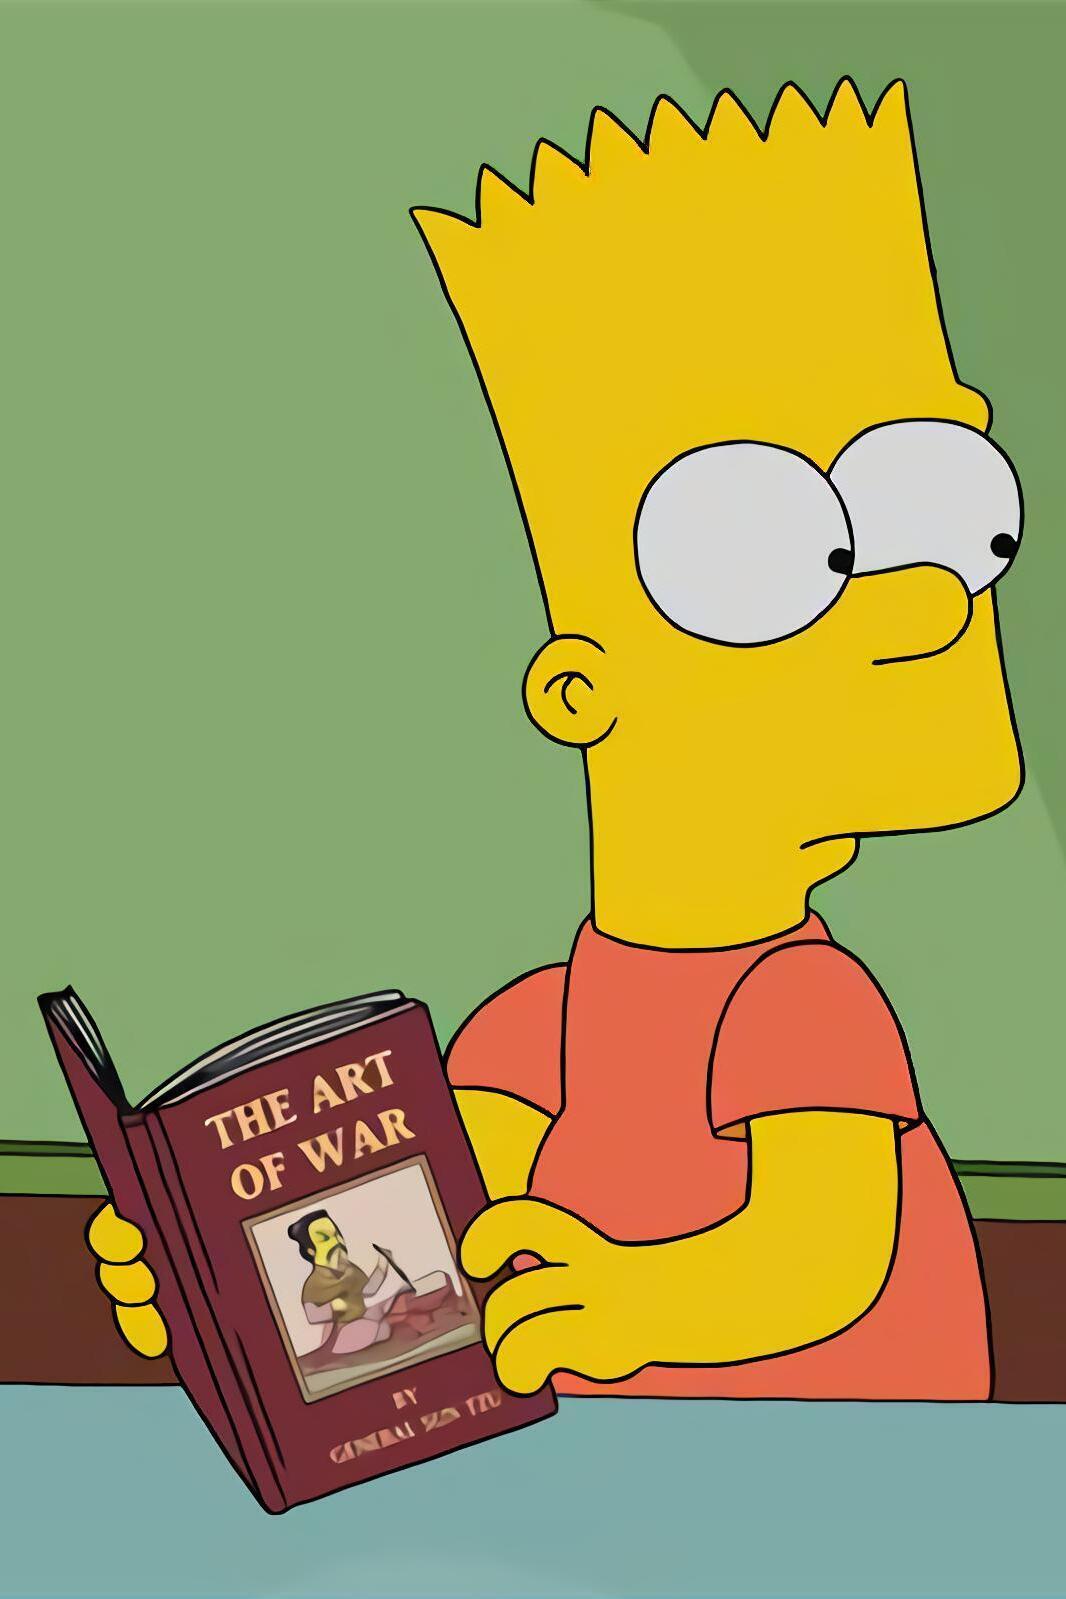 The Simpsons - No Good Read Goes Unpunished